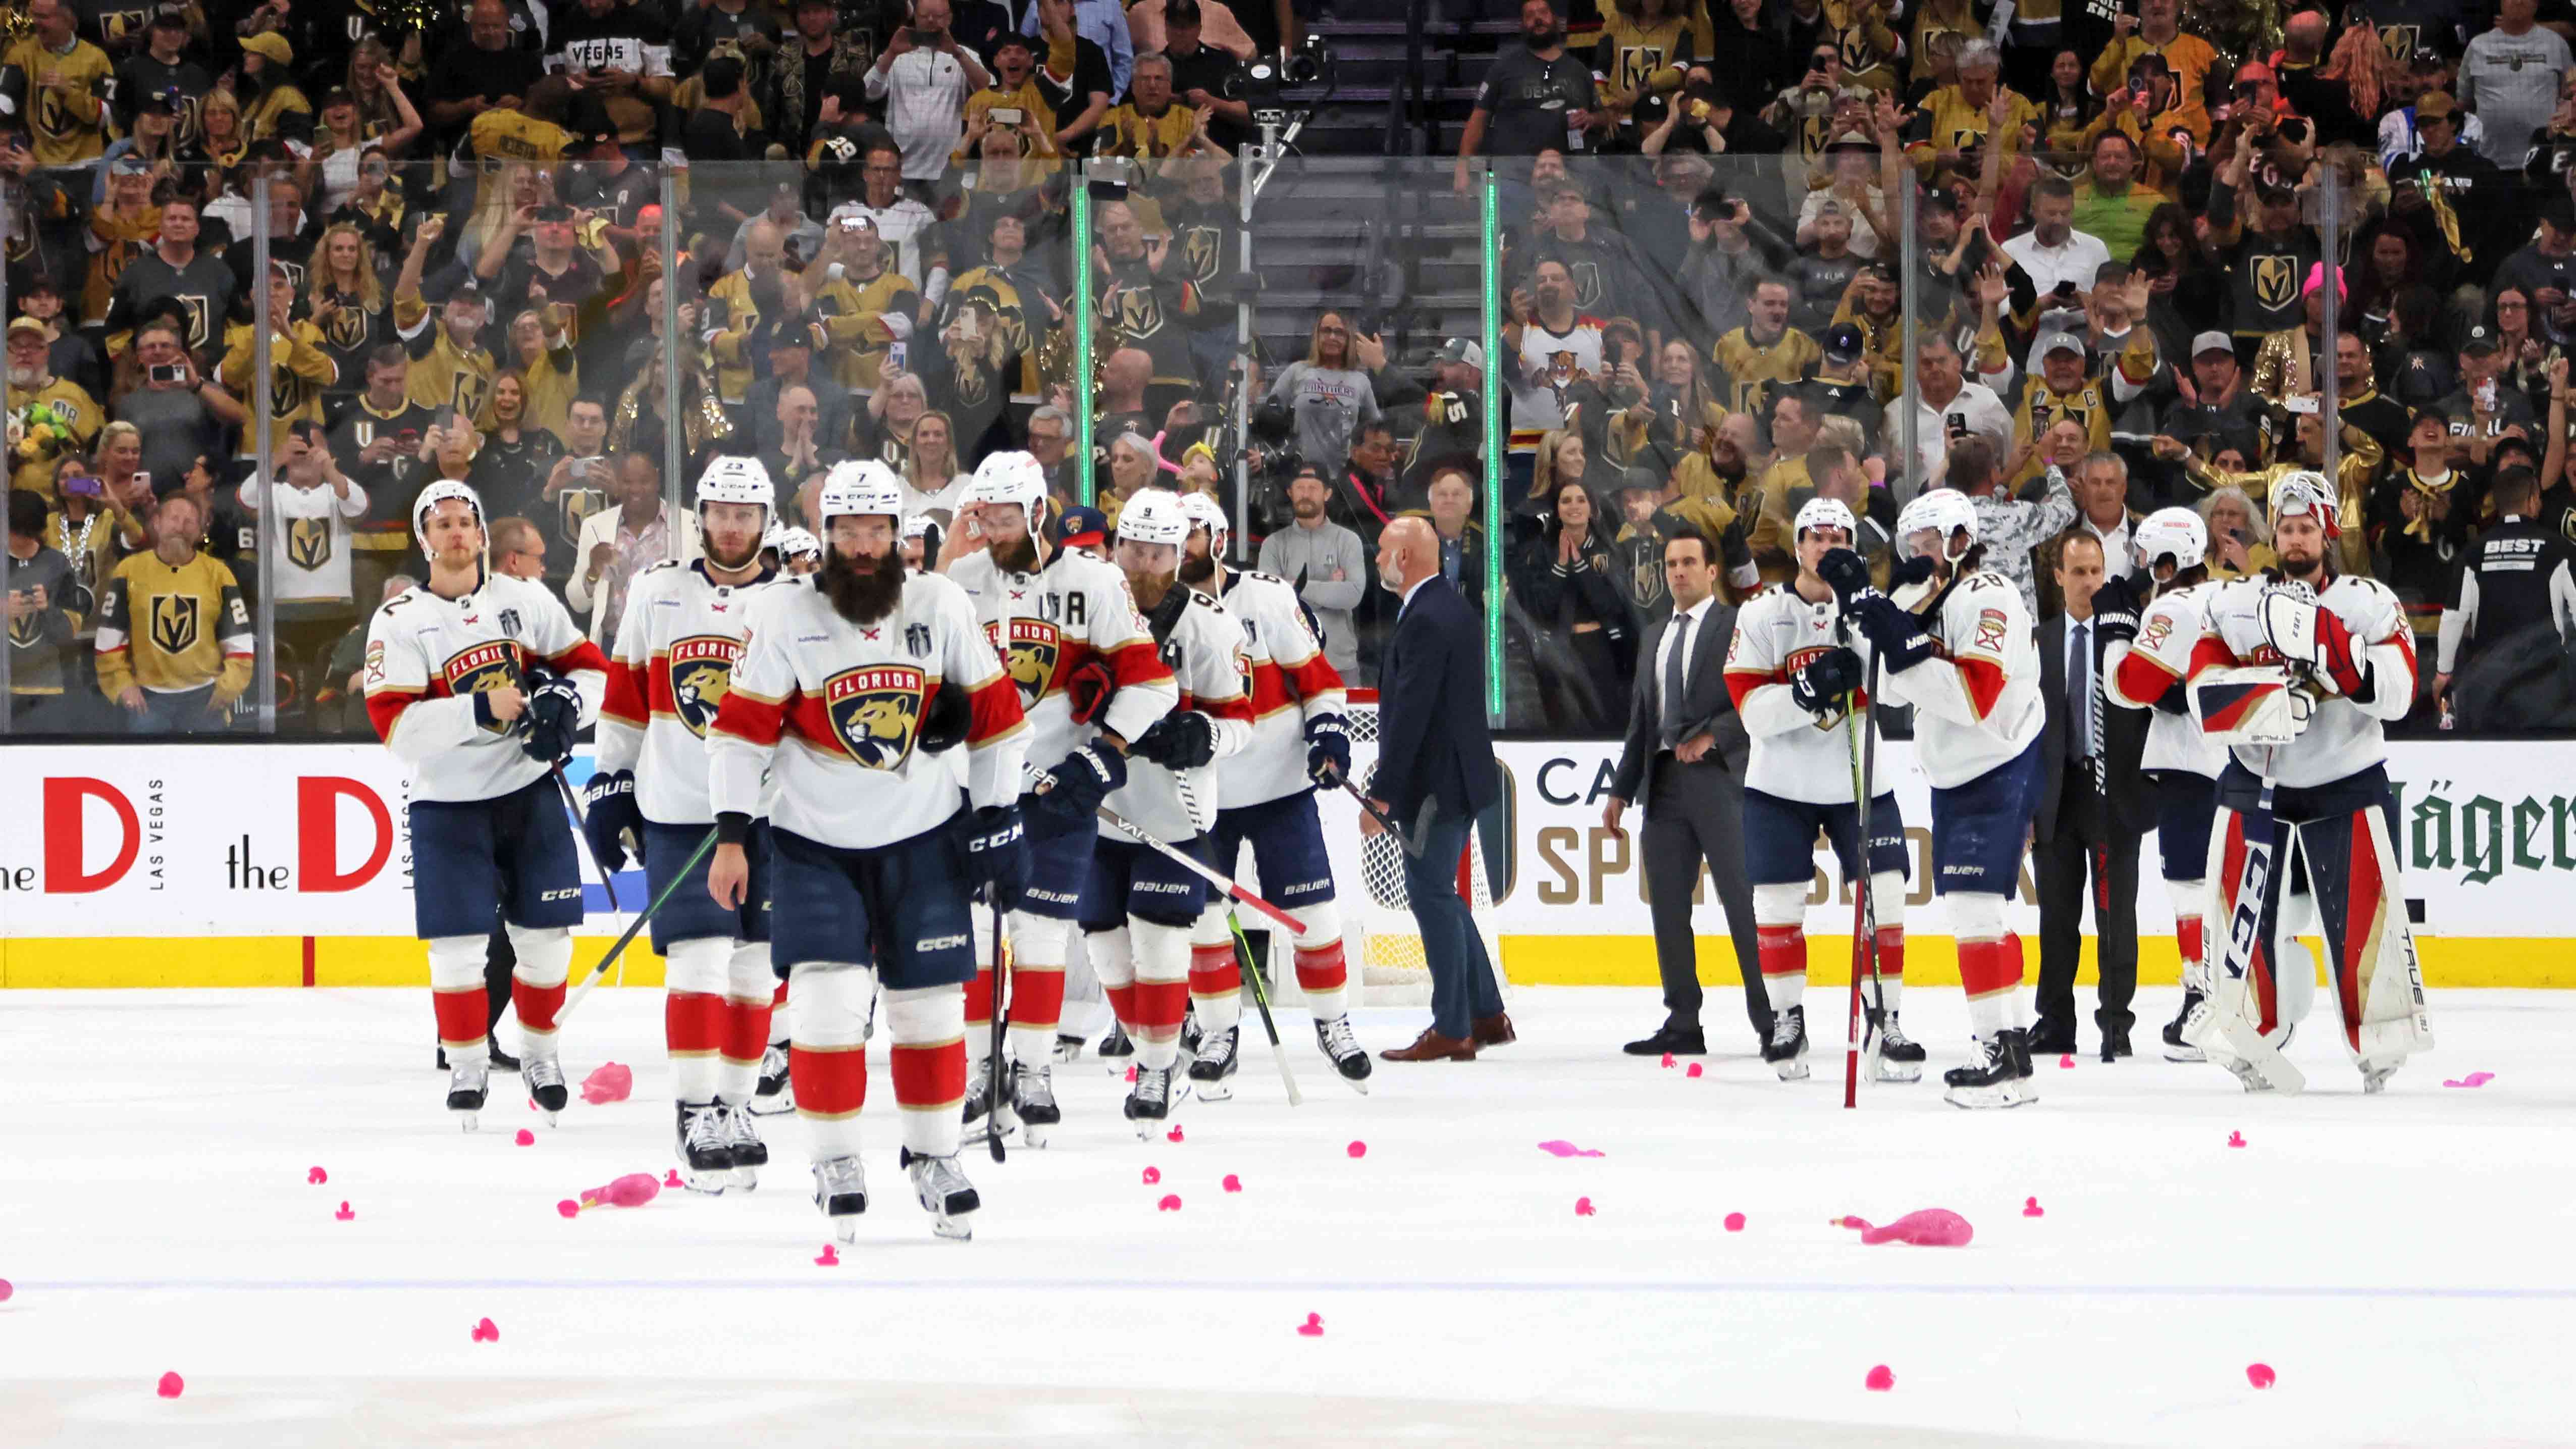 NHL's West is best again in Stanley Cup finals